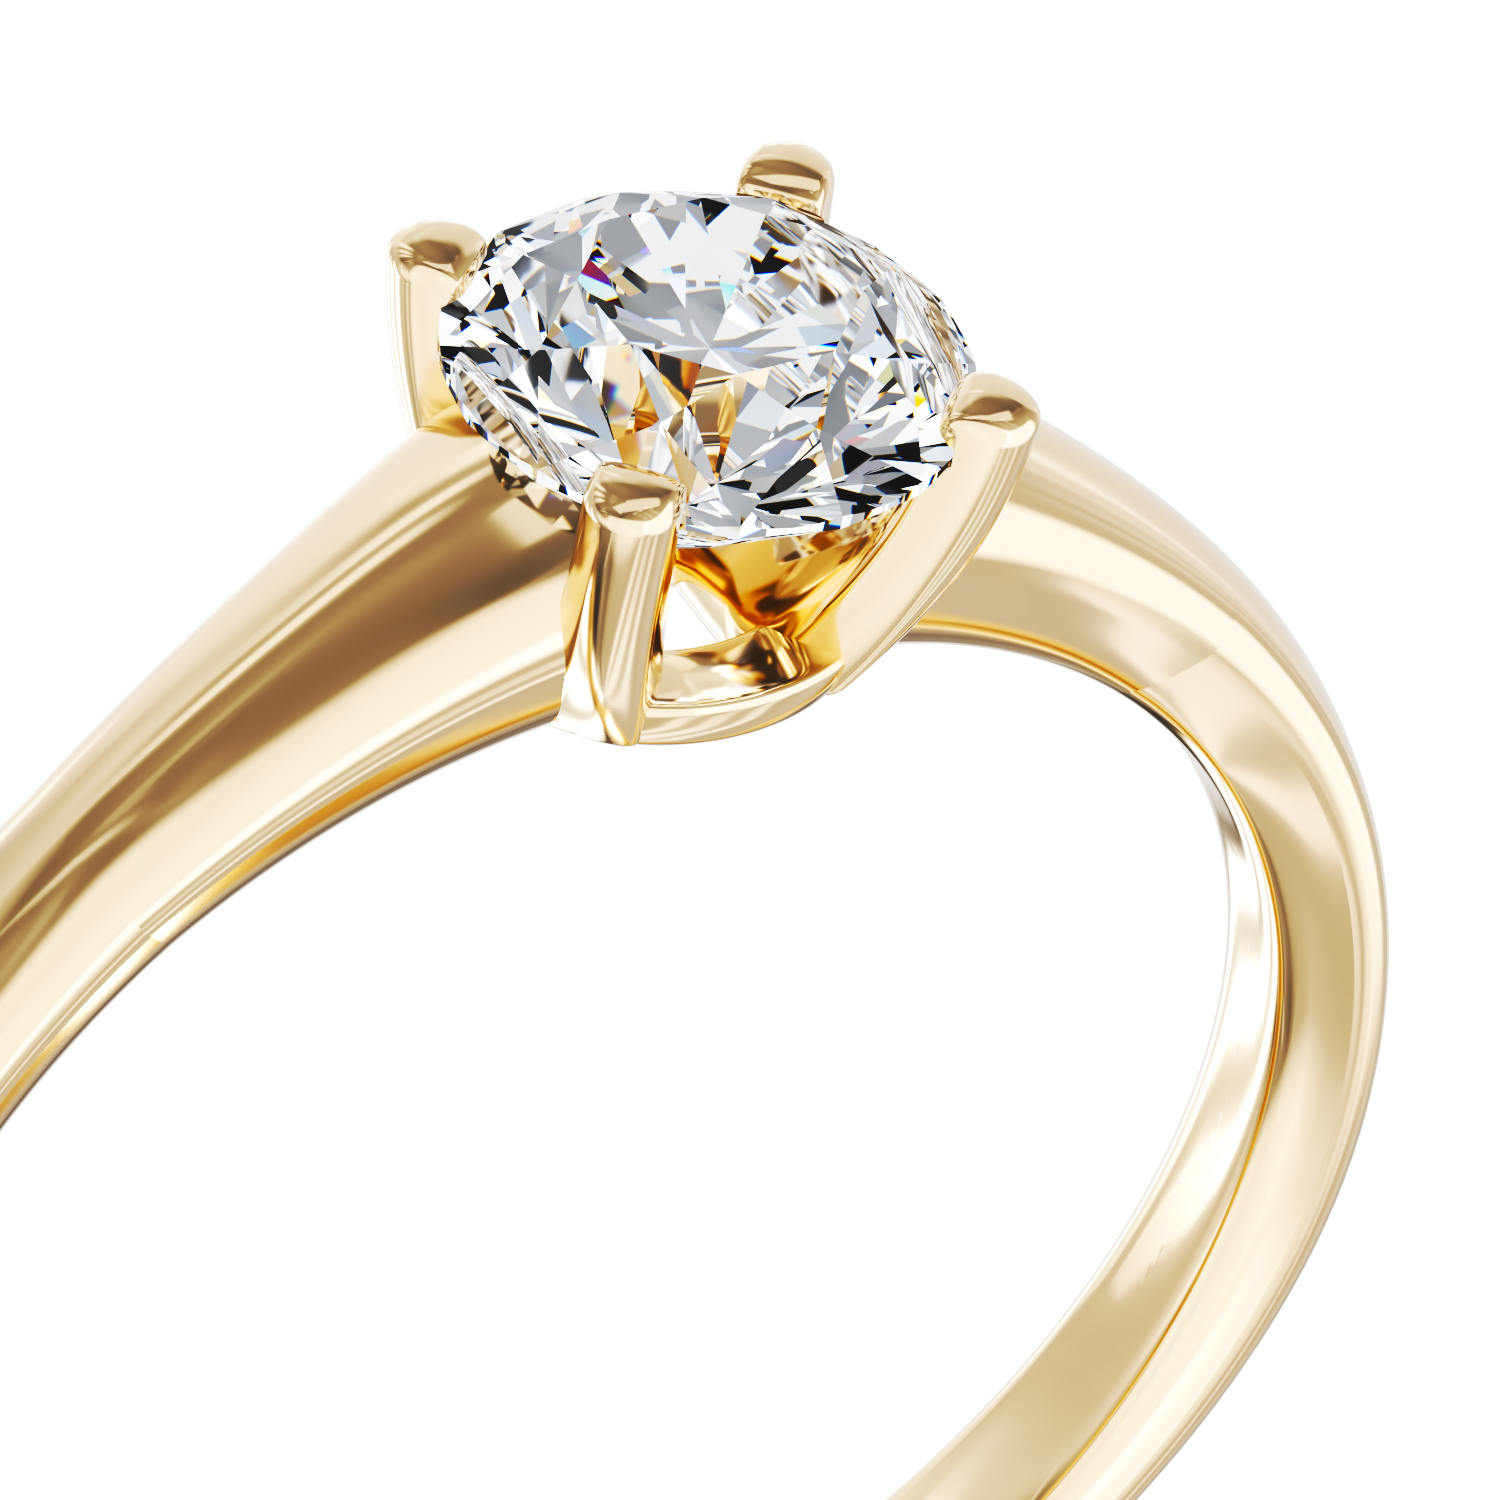 18K yellow gold engagement ring with 0.5ct solitaire diamond